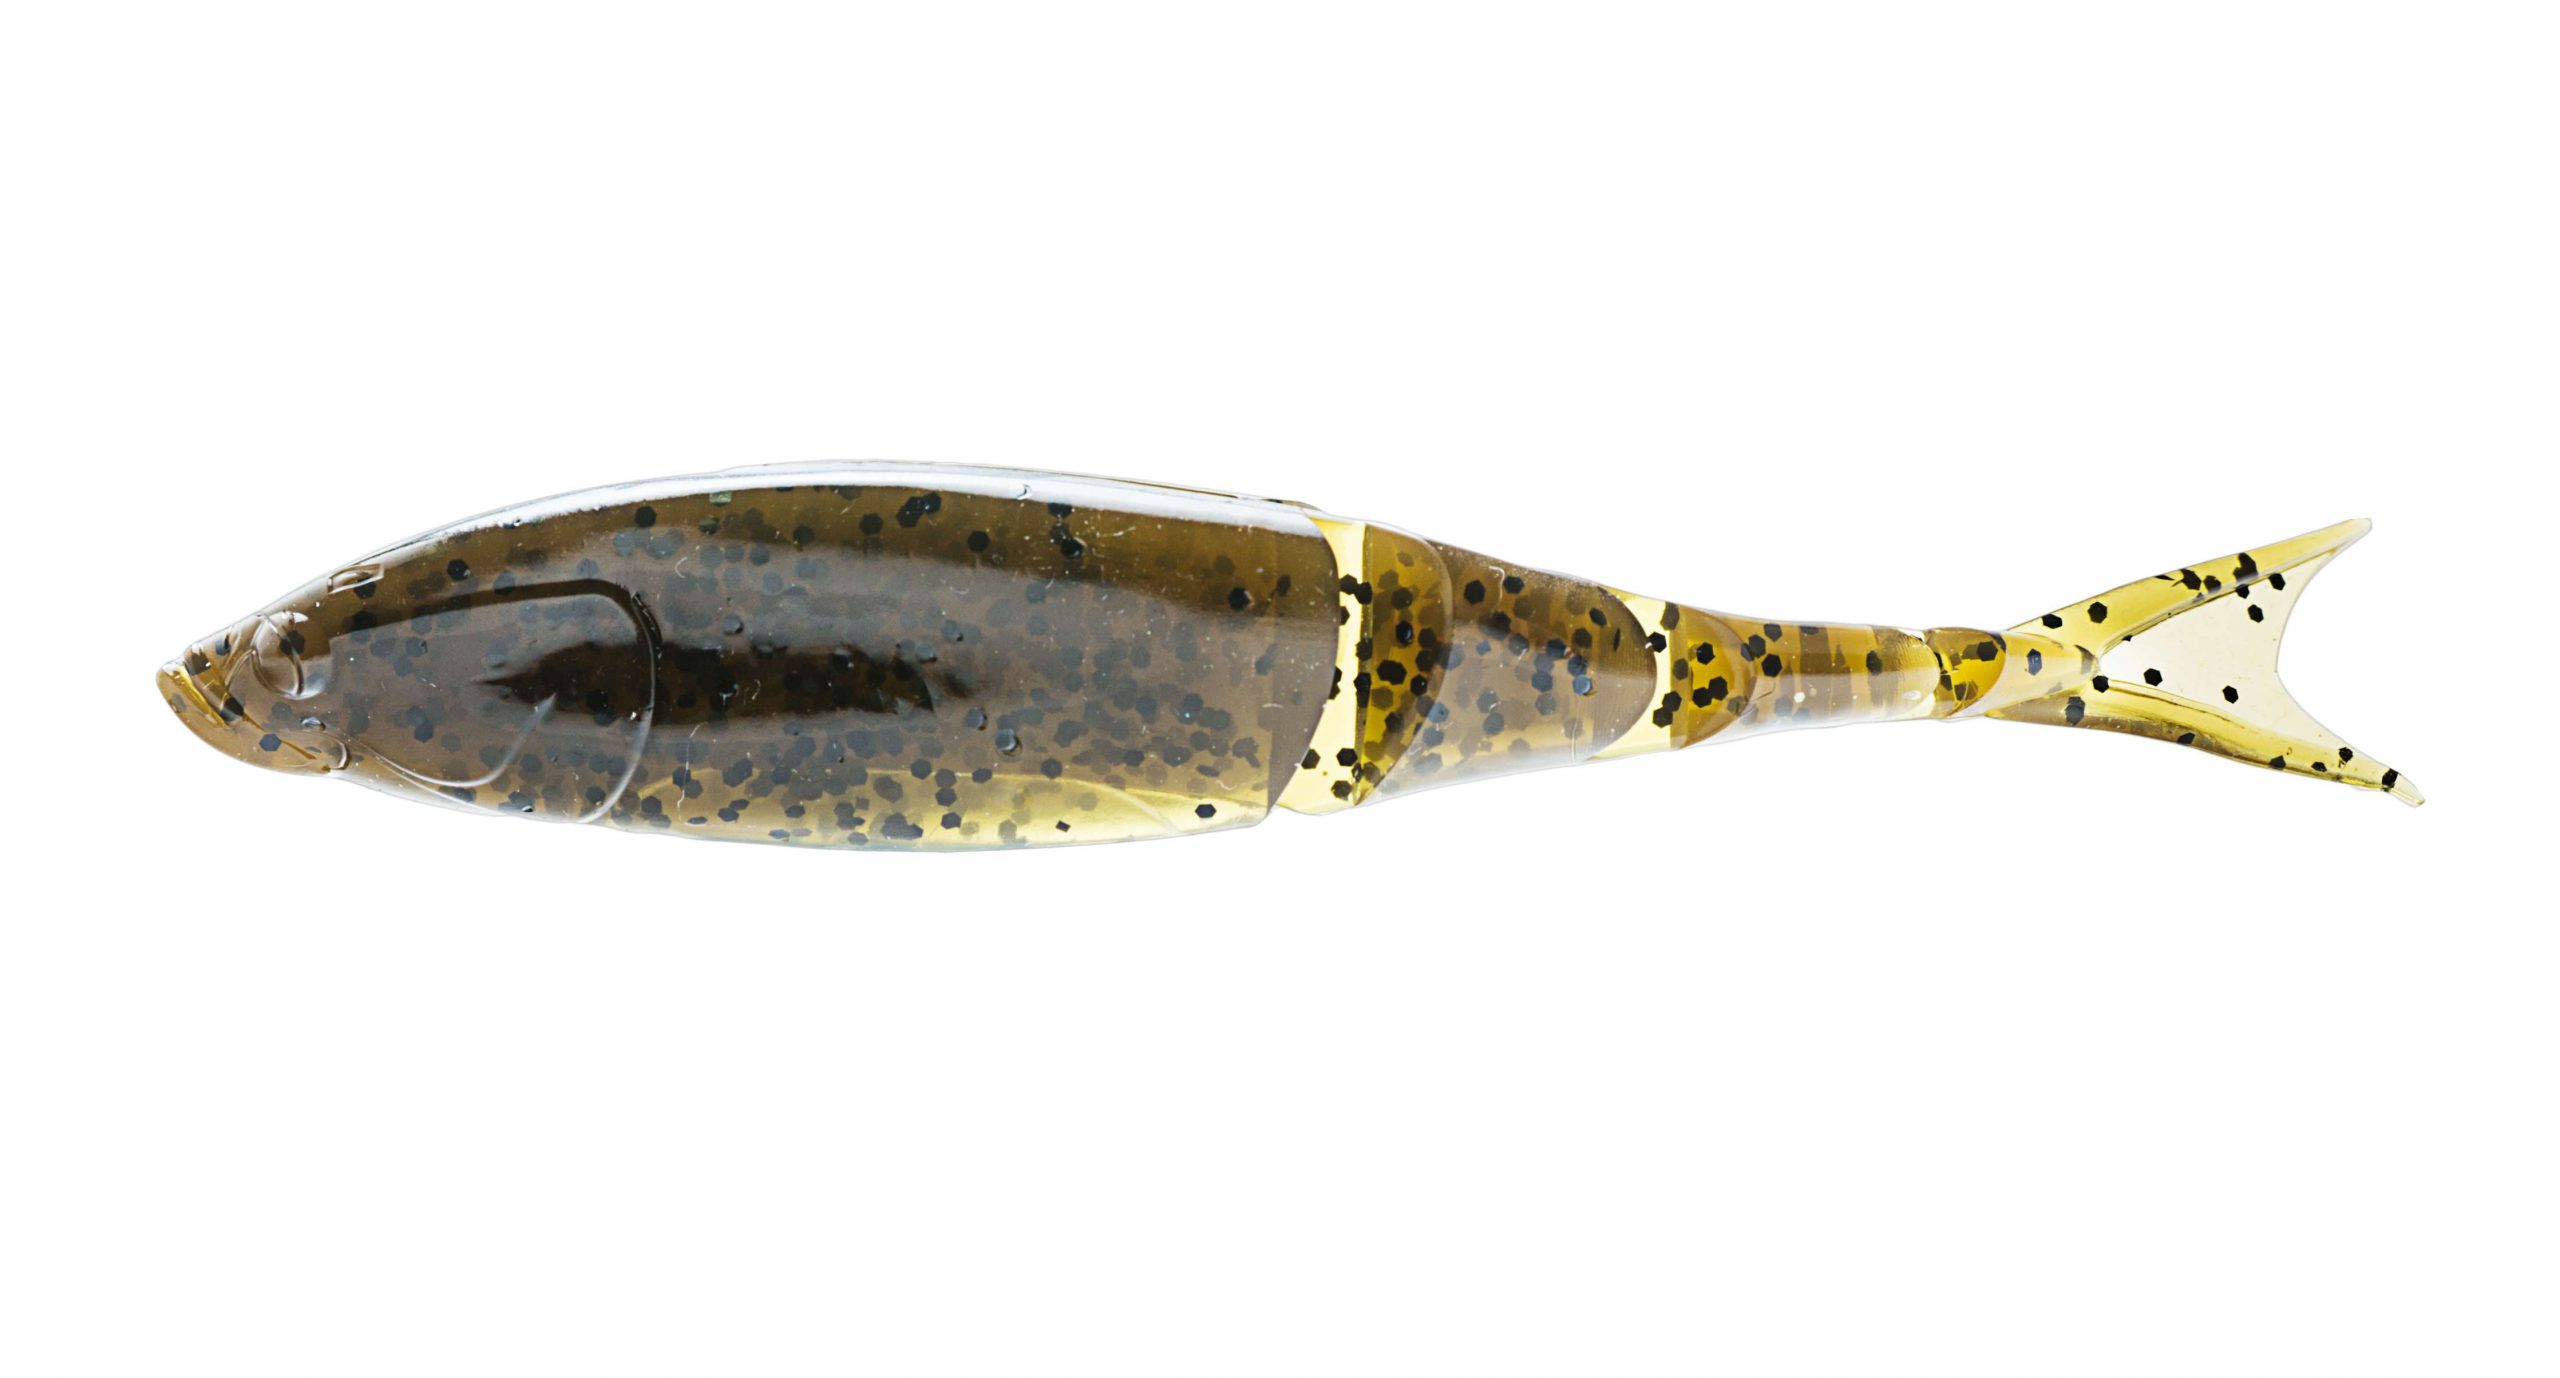 <b>Z-Man</b><br>	Razor Shadz<br>	A segmented fish-shaped body and forked tail make this a good facsimile of a baitfish. The sloped head causes the bait to dive when unweighted on a twitching retrieve, which Z-Man says can't be duplicated by other soft baits. The lures measure 4.5 inches and are available in 10 colors, including green pumpkin (above). 